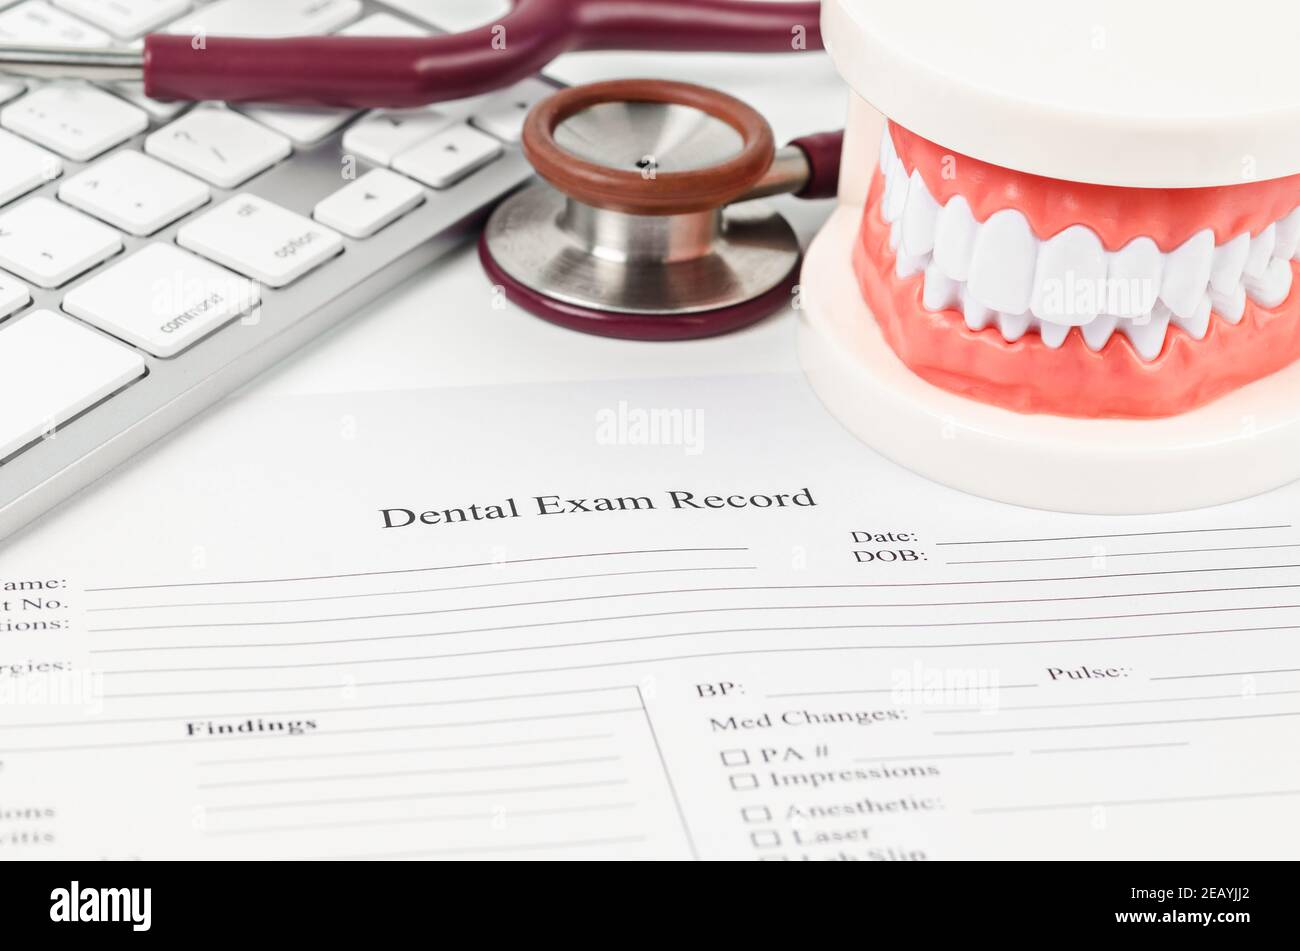 Dental exam record and model teeth with stethoscope medical on work table. Stock Photo